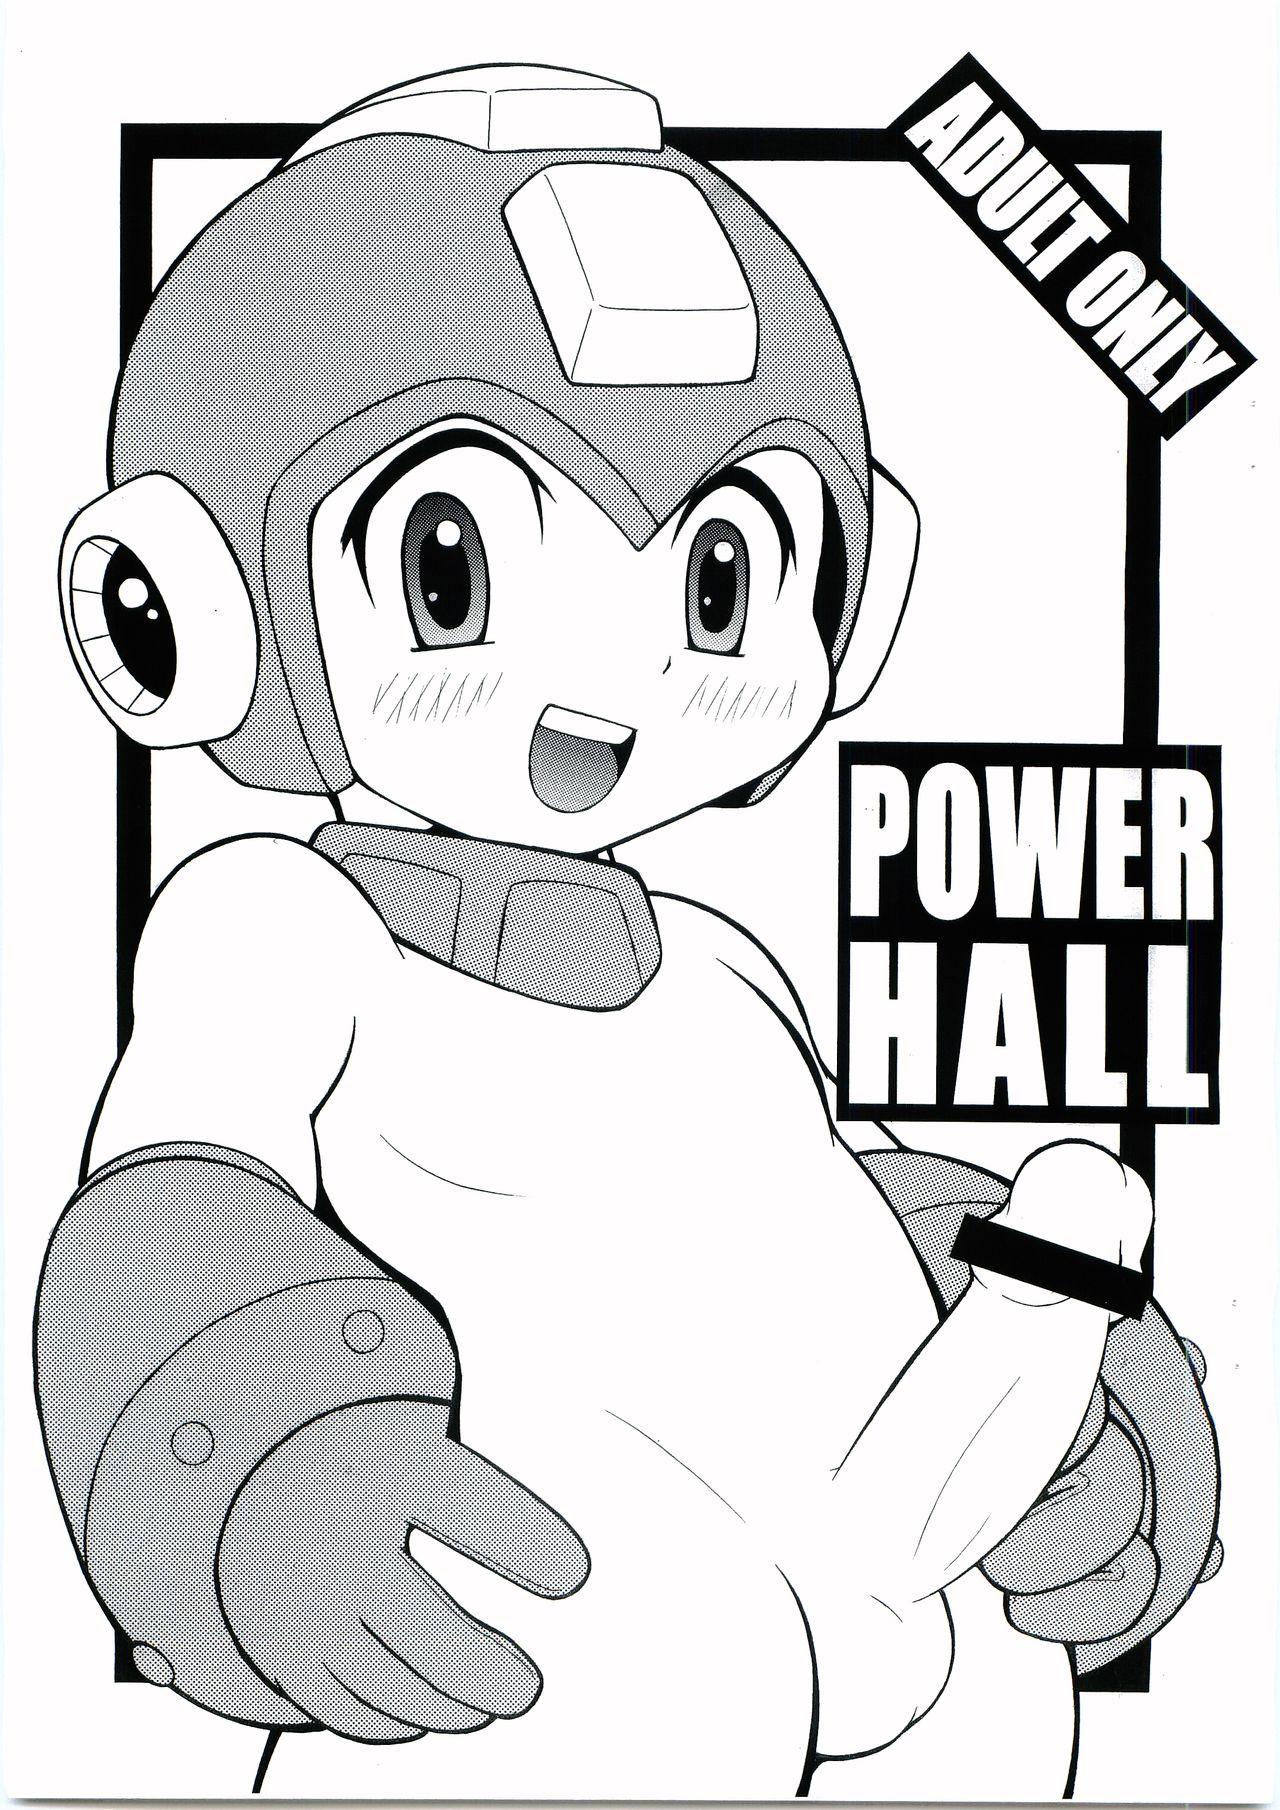 18yearsold POWER HALL - Megaman Yanks Featured - Page 1